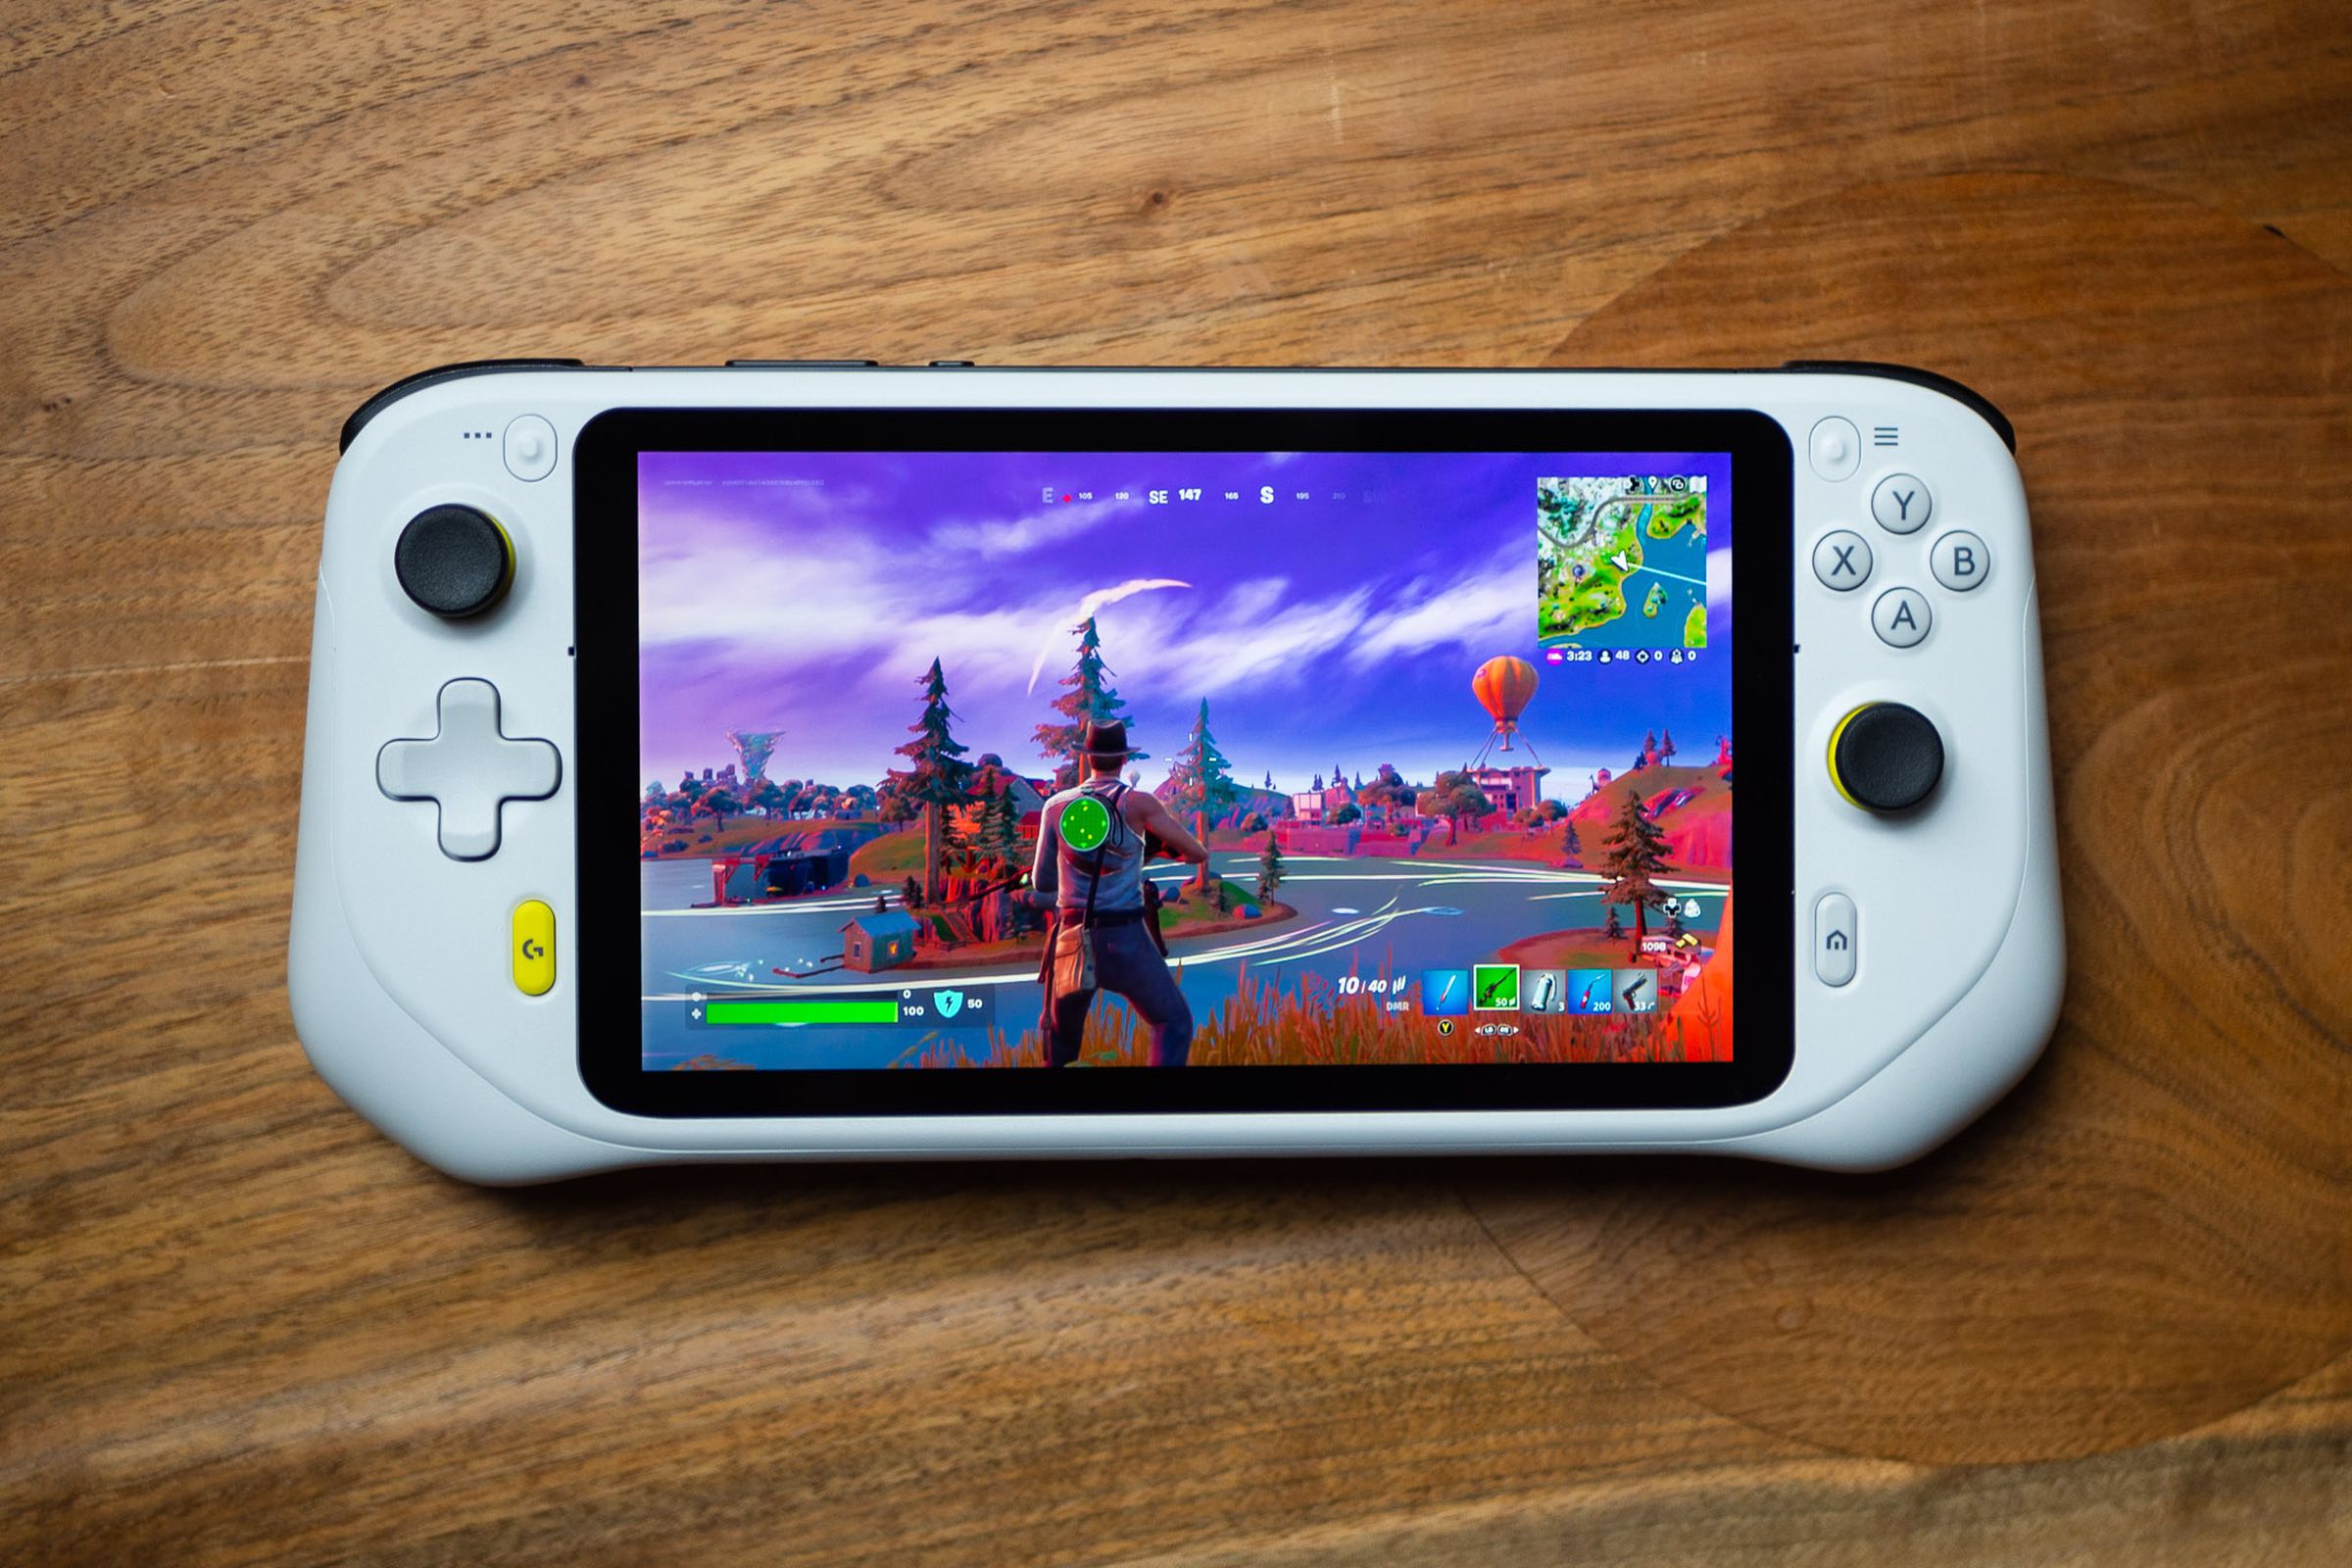 The Logitech G Cloud Gaming Handheld is shown running Fortnite over the cloud.